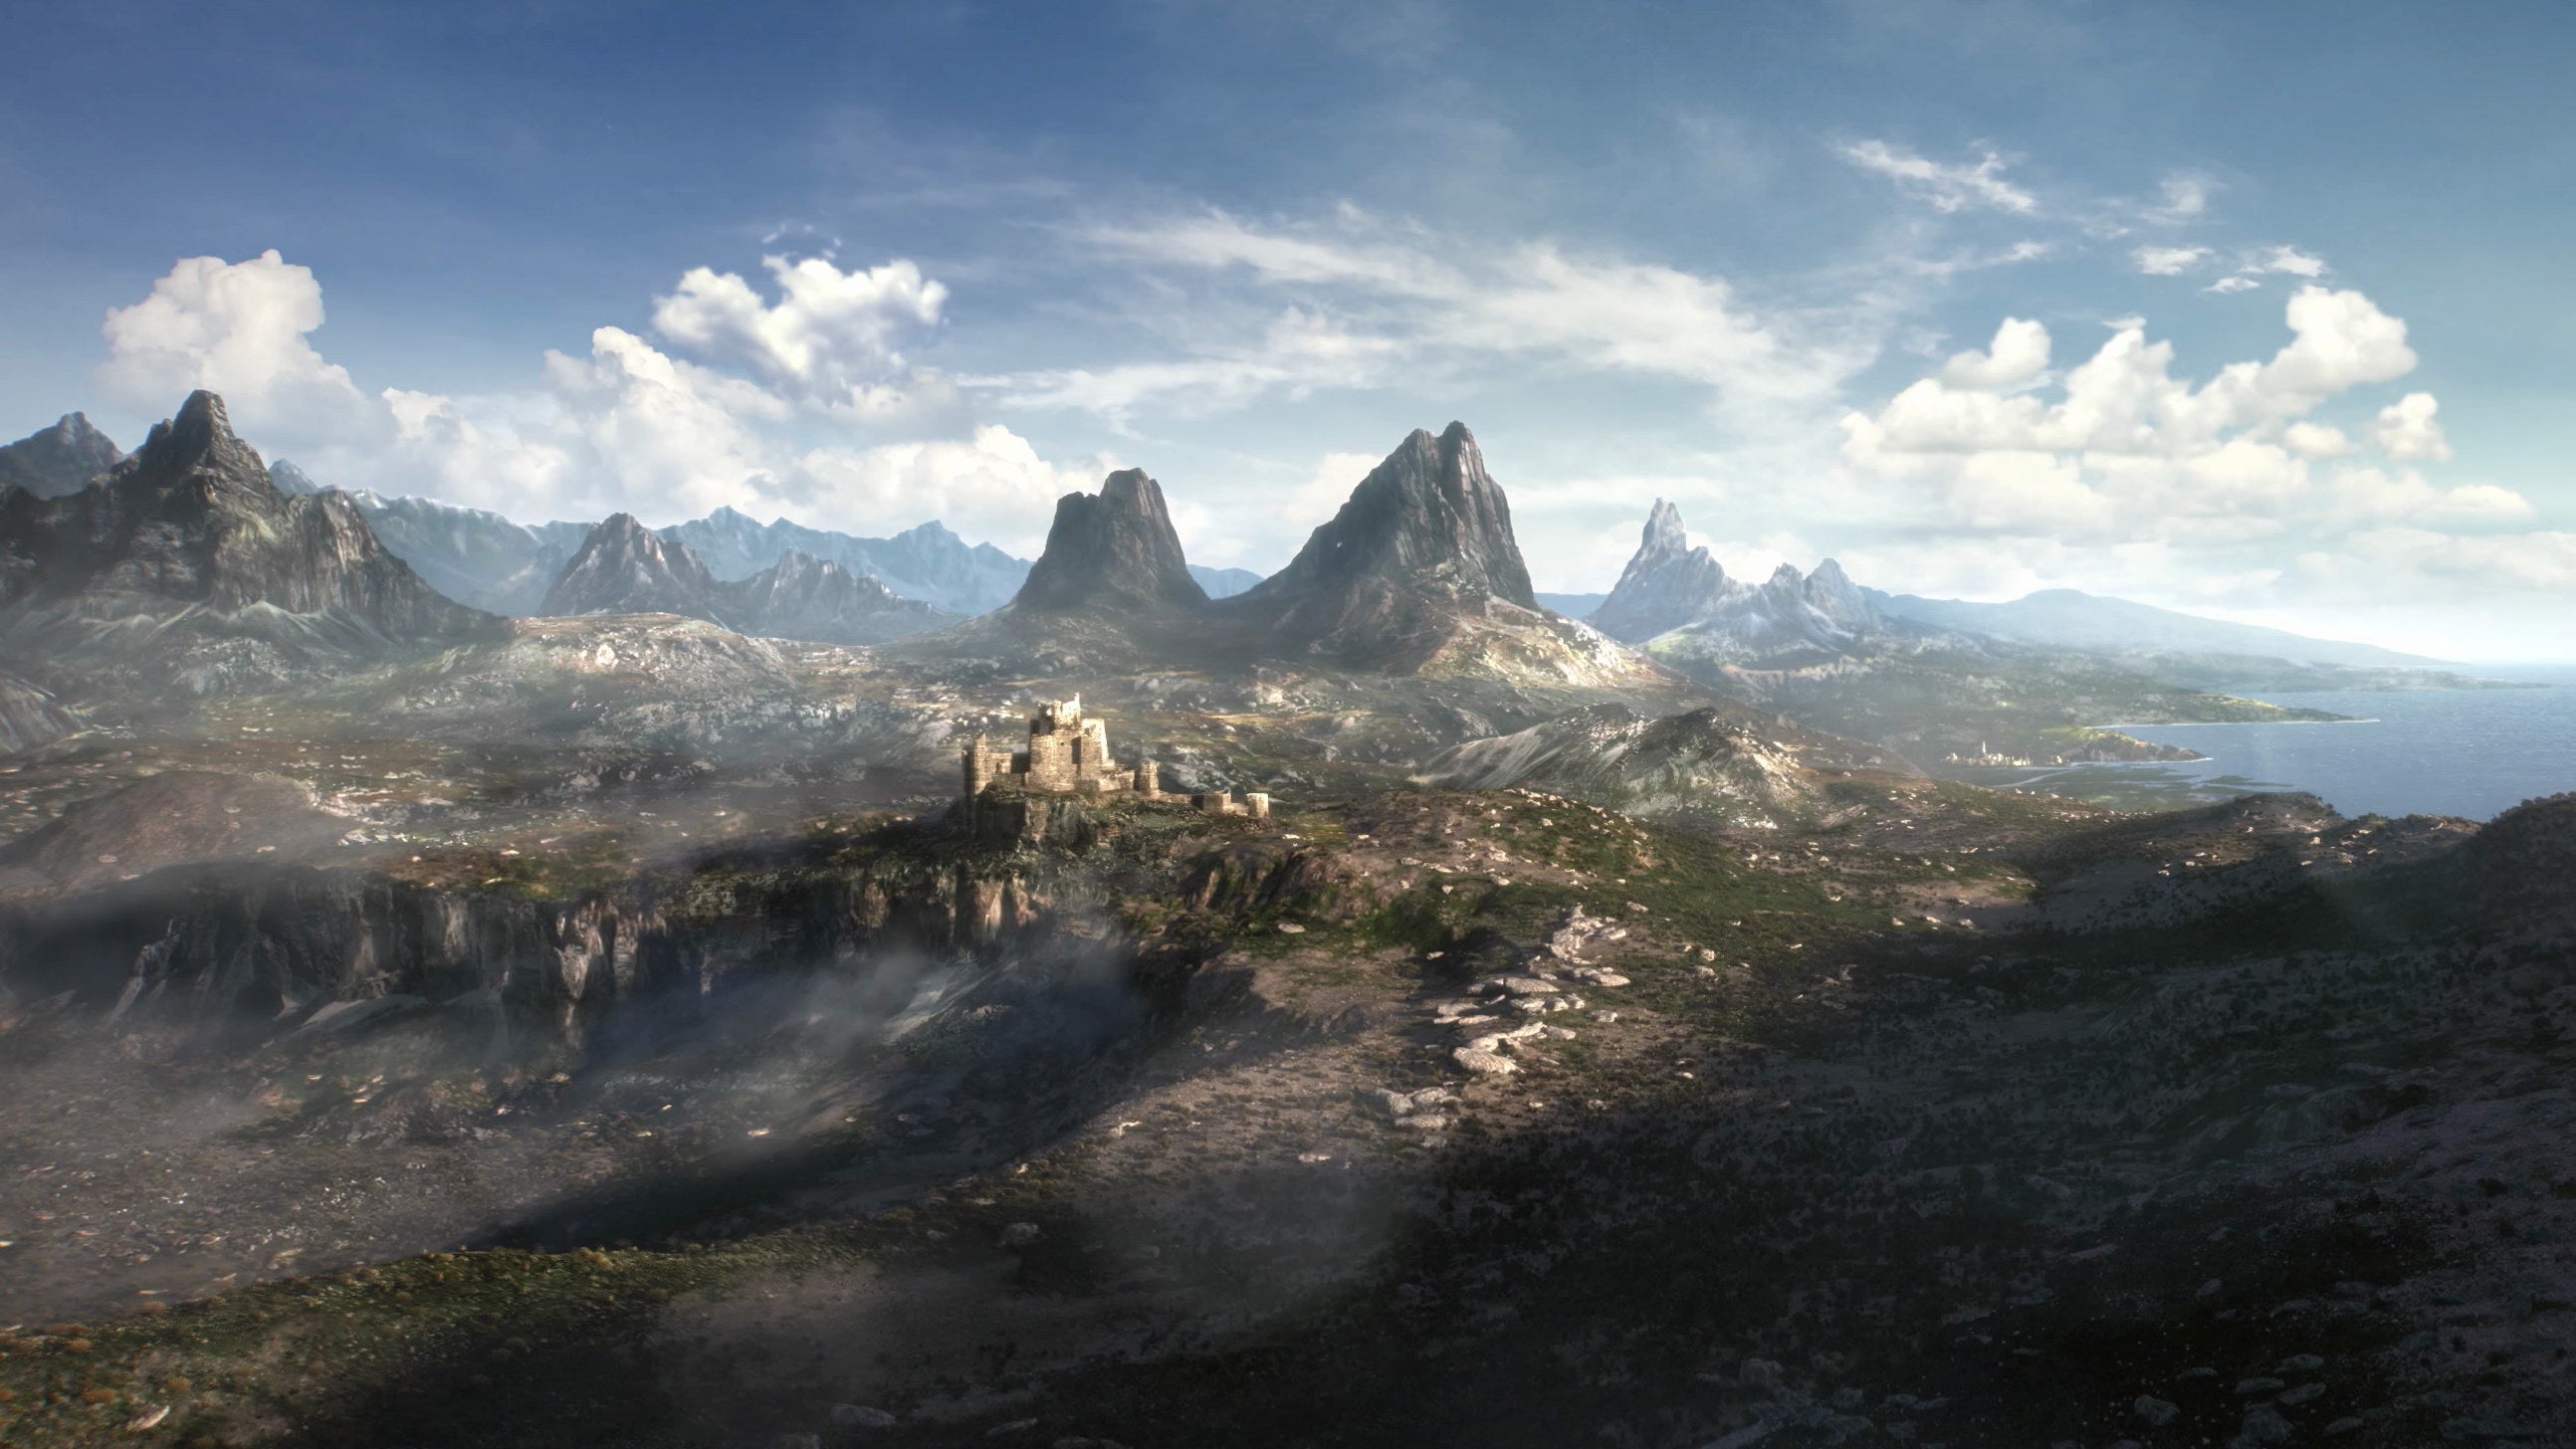 The unknown land of The Elder Scrolls VI in a frame from the 2018 teaser trailer.